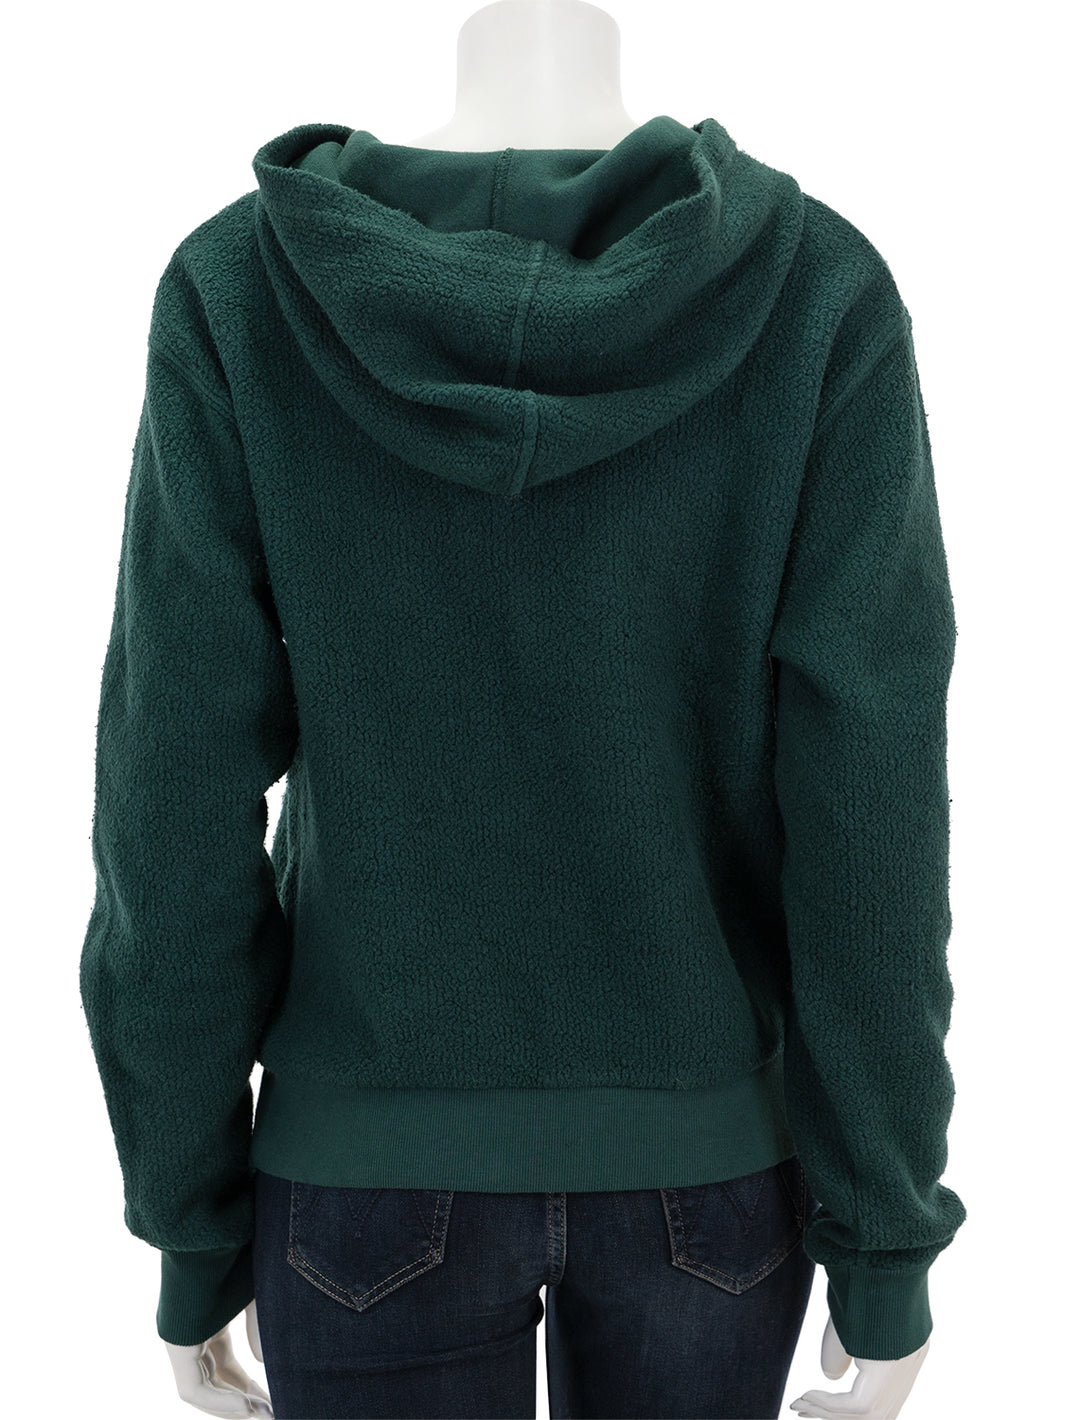 Back view of Perfectwhitetee's reese hoodie in pine.